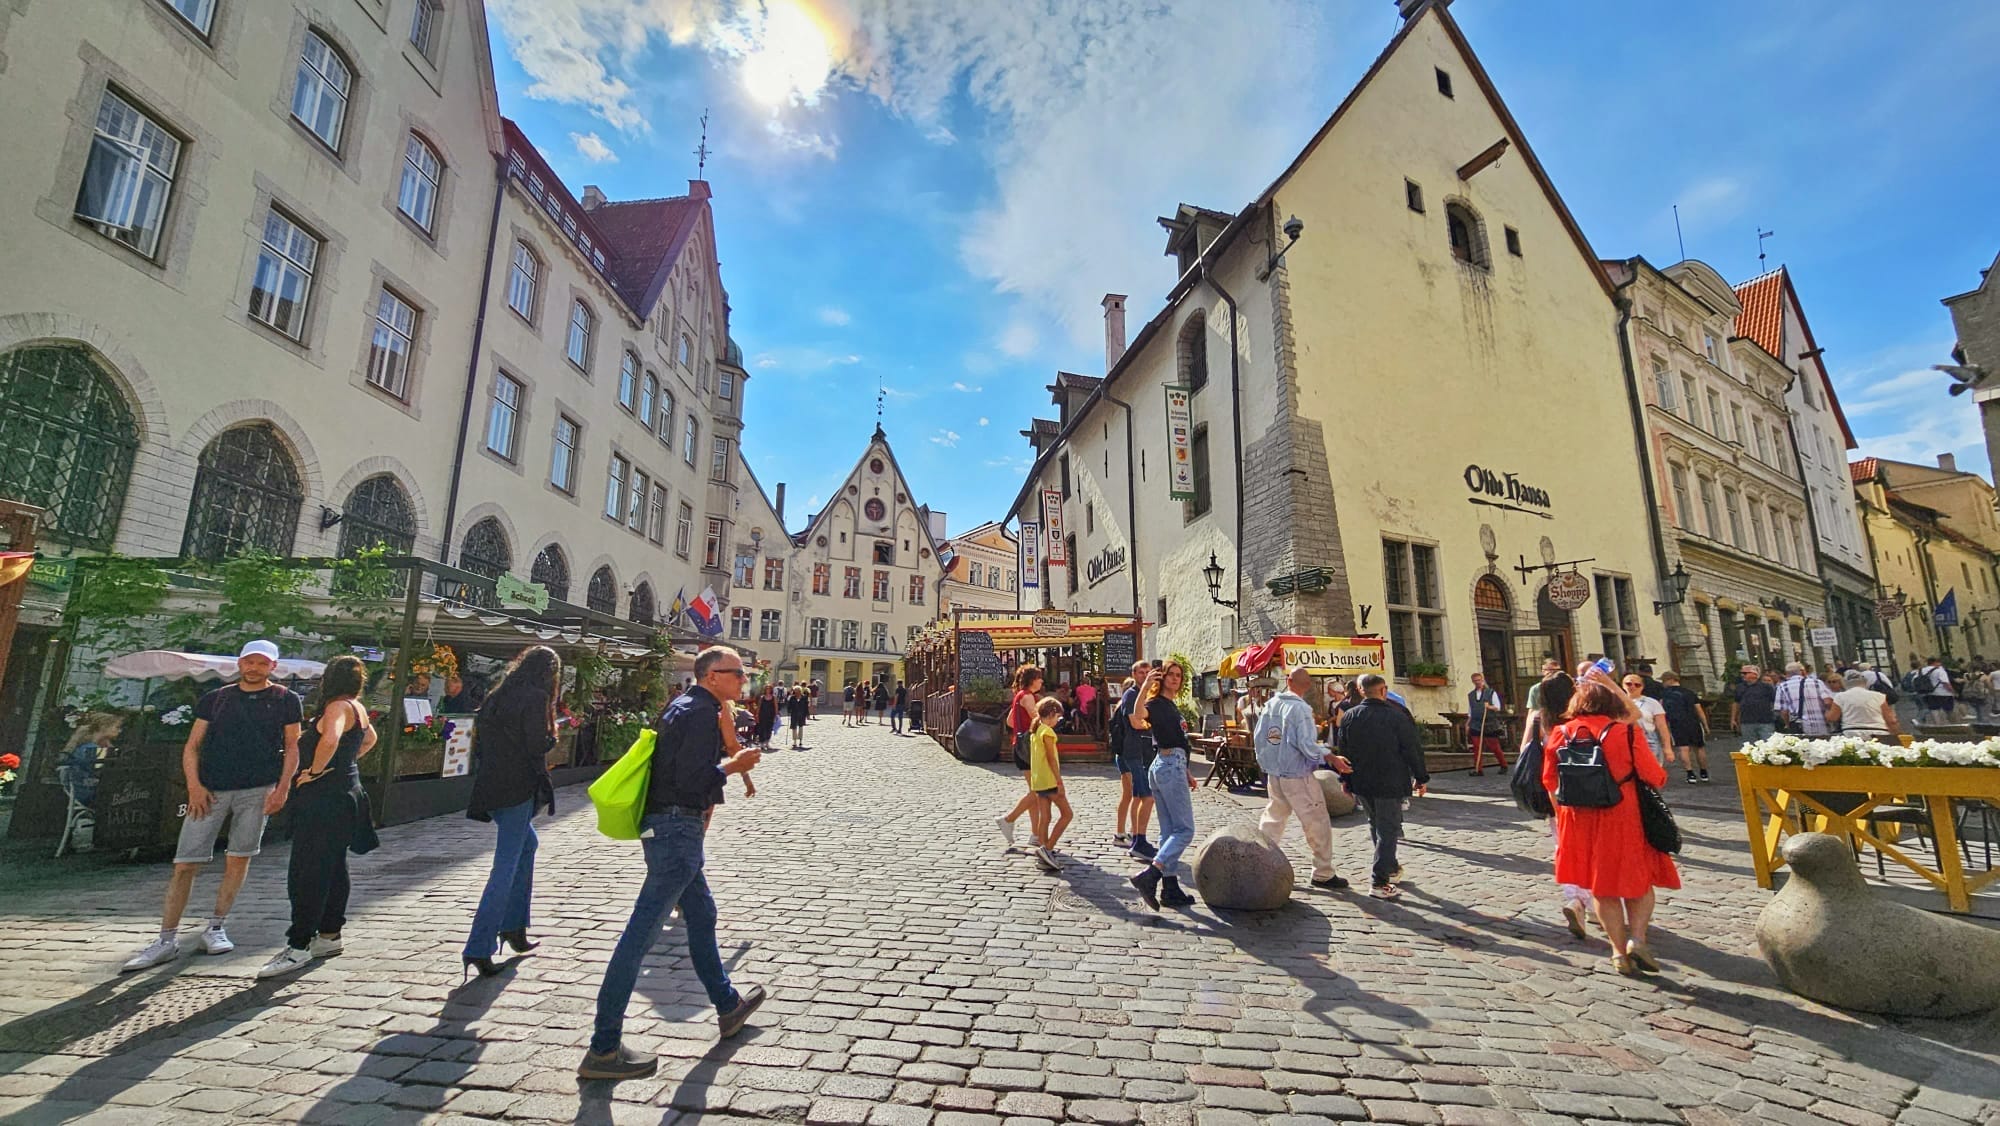 itinerary of What to see in Tallinn, Estonia